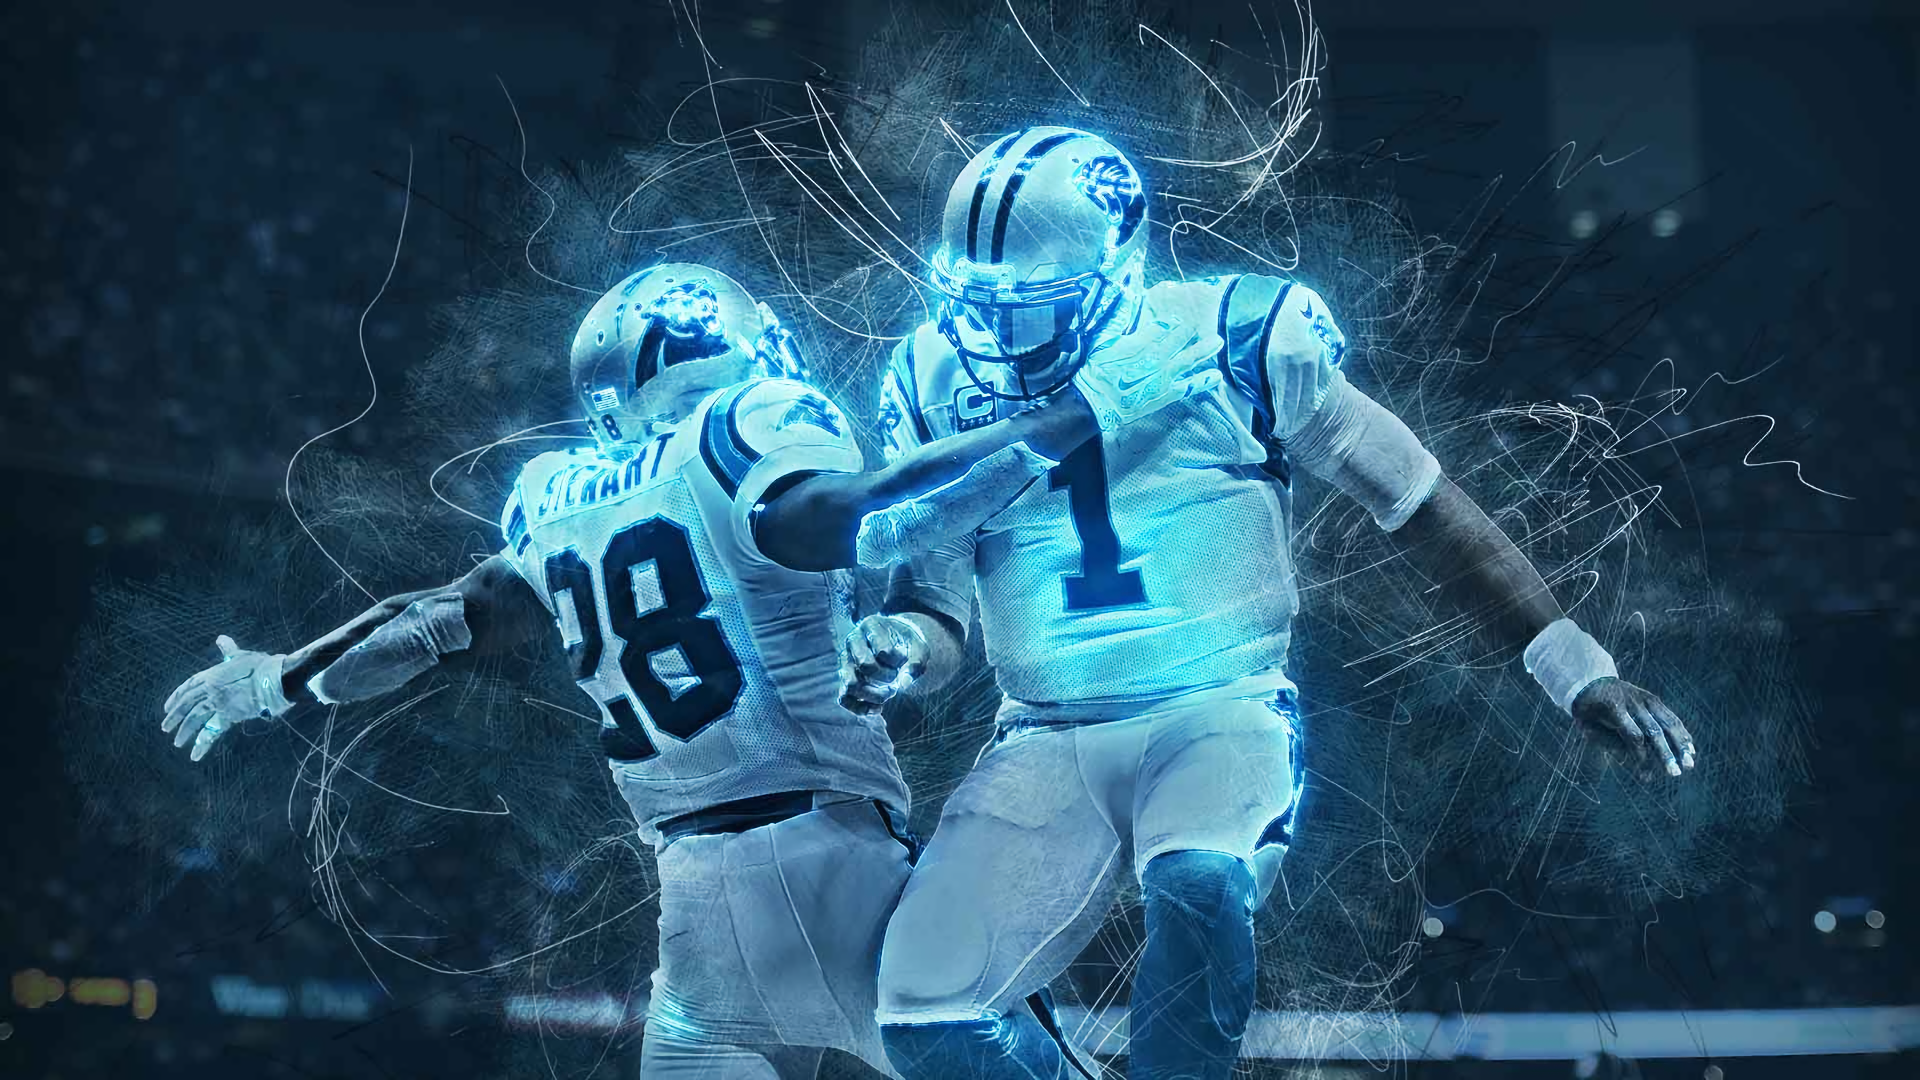 HD wallpaper featuring an artistic rendition of Cam Newton in action on the football field.